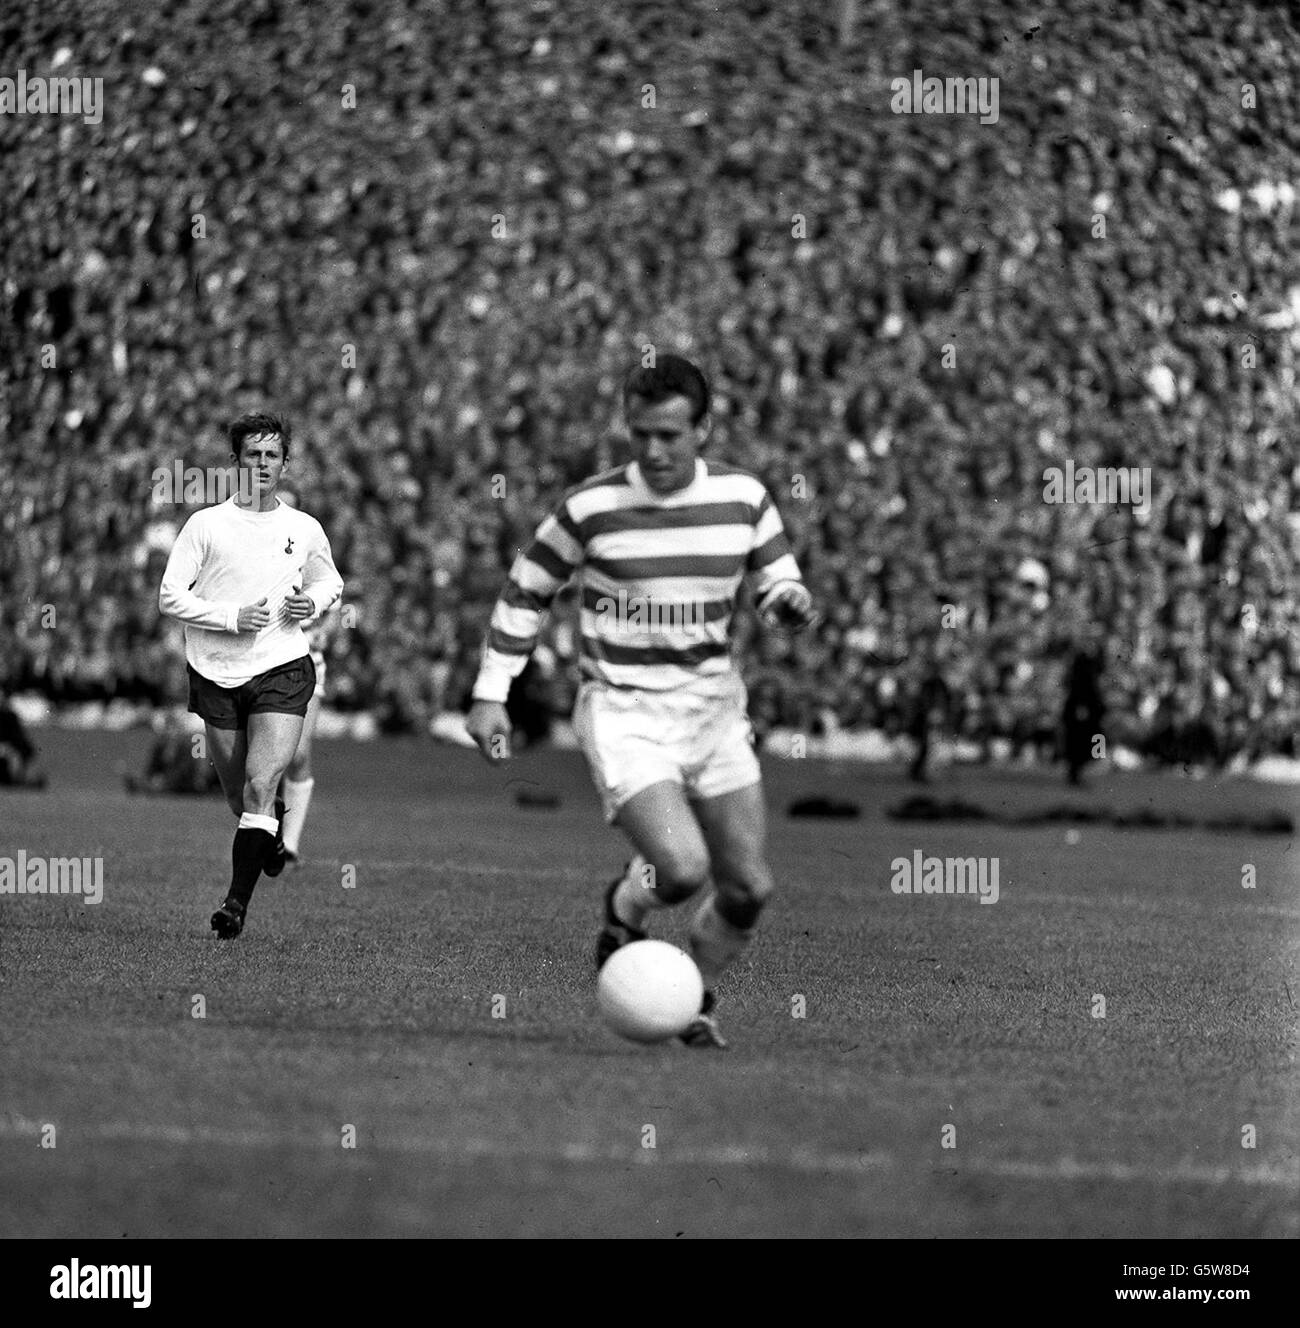 Celtic's Steve Chalmers. Celtic's Steve Chalmers (centre) shown in action for Celtic. Stock Photo